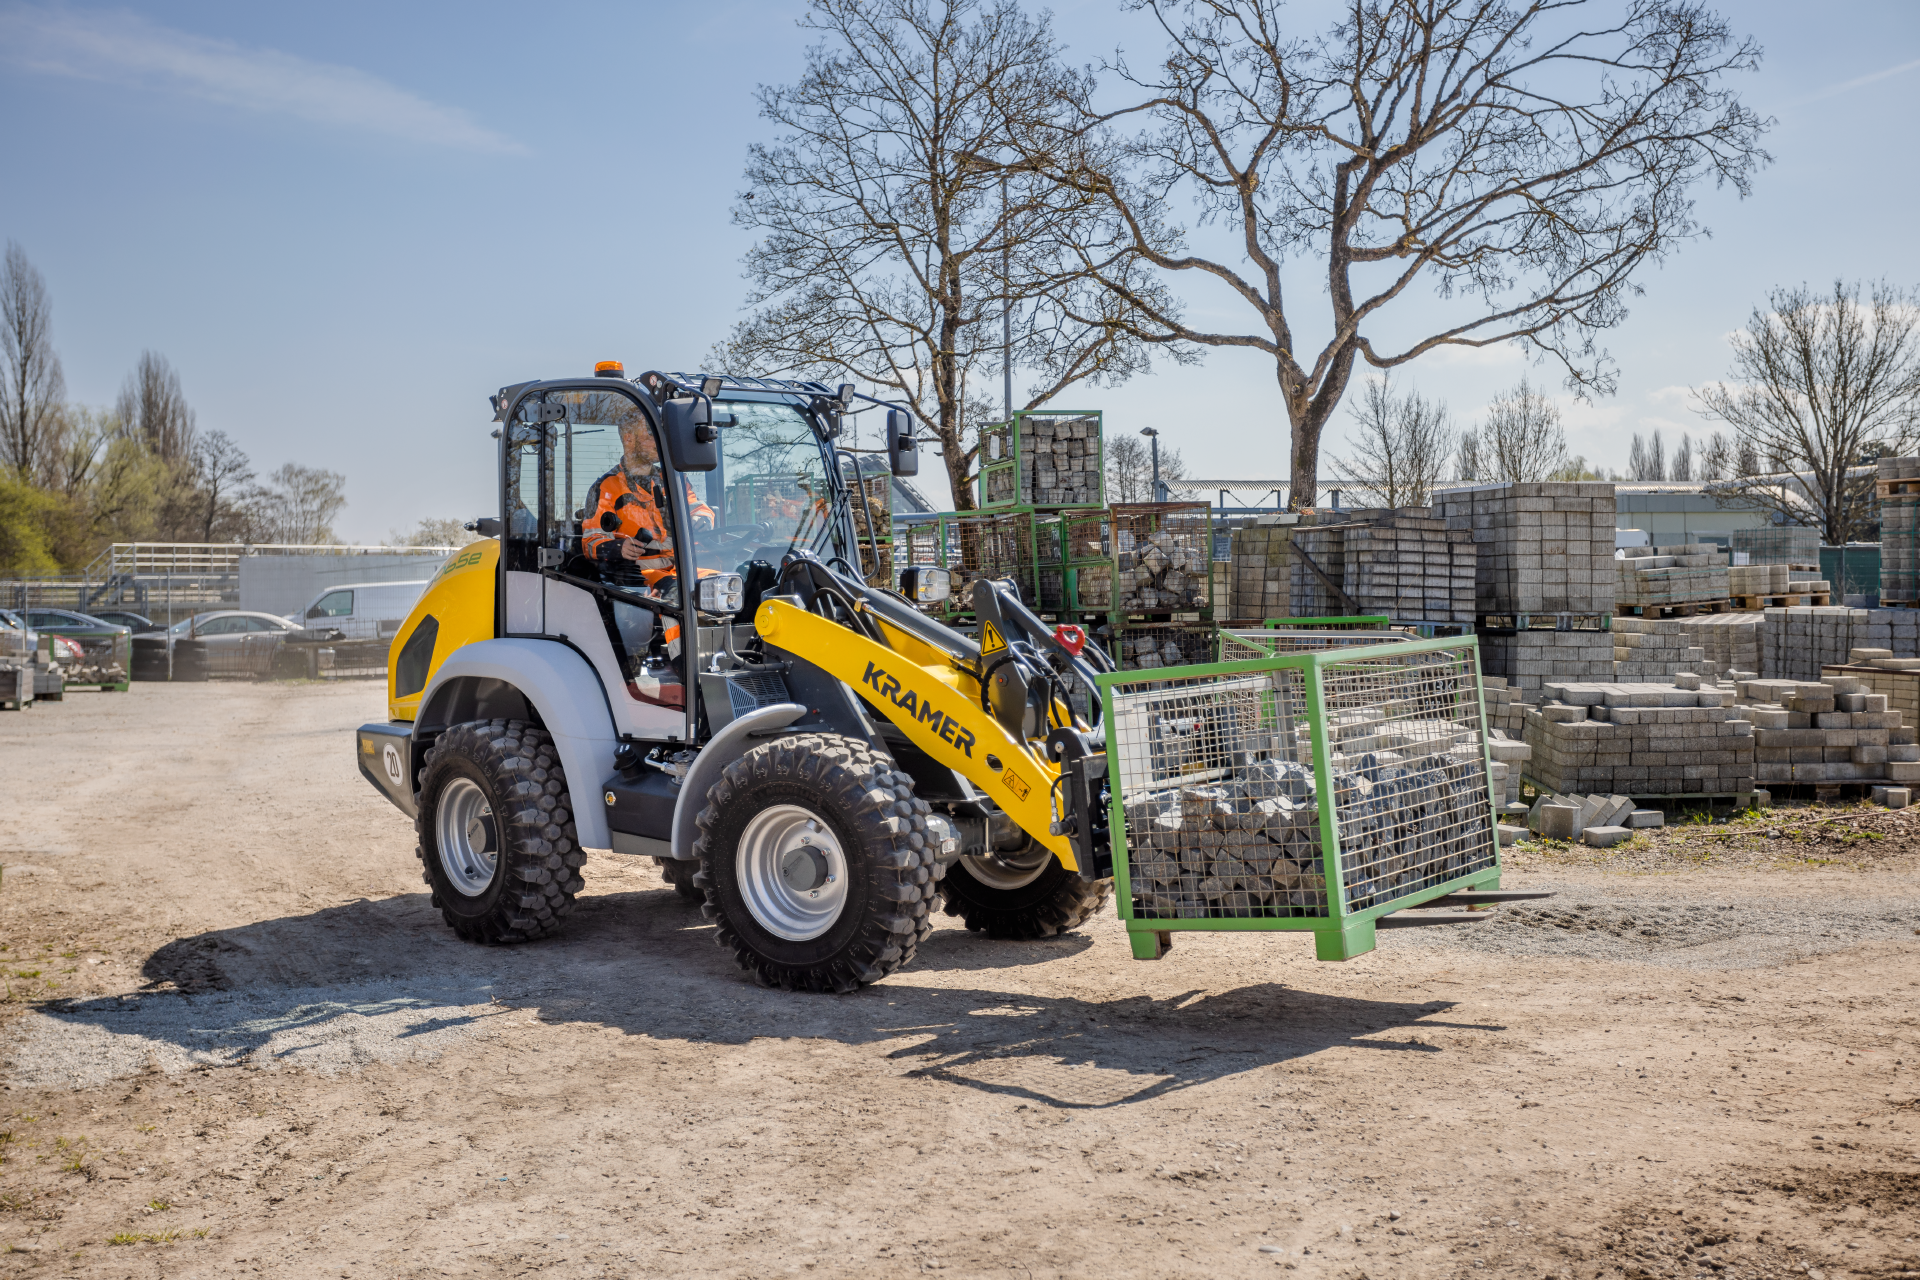 The fully electric Kramer wheel loader 5065e while transporting stones.